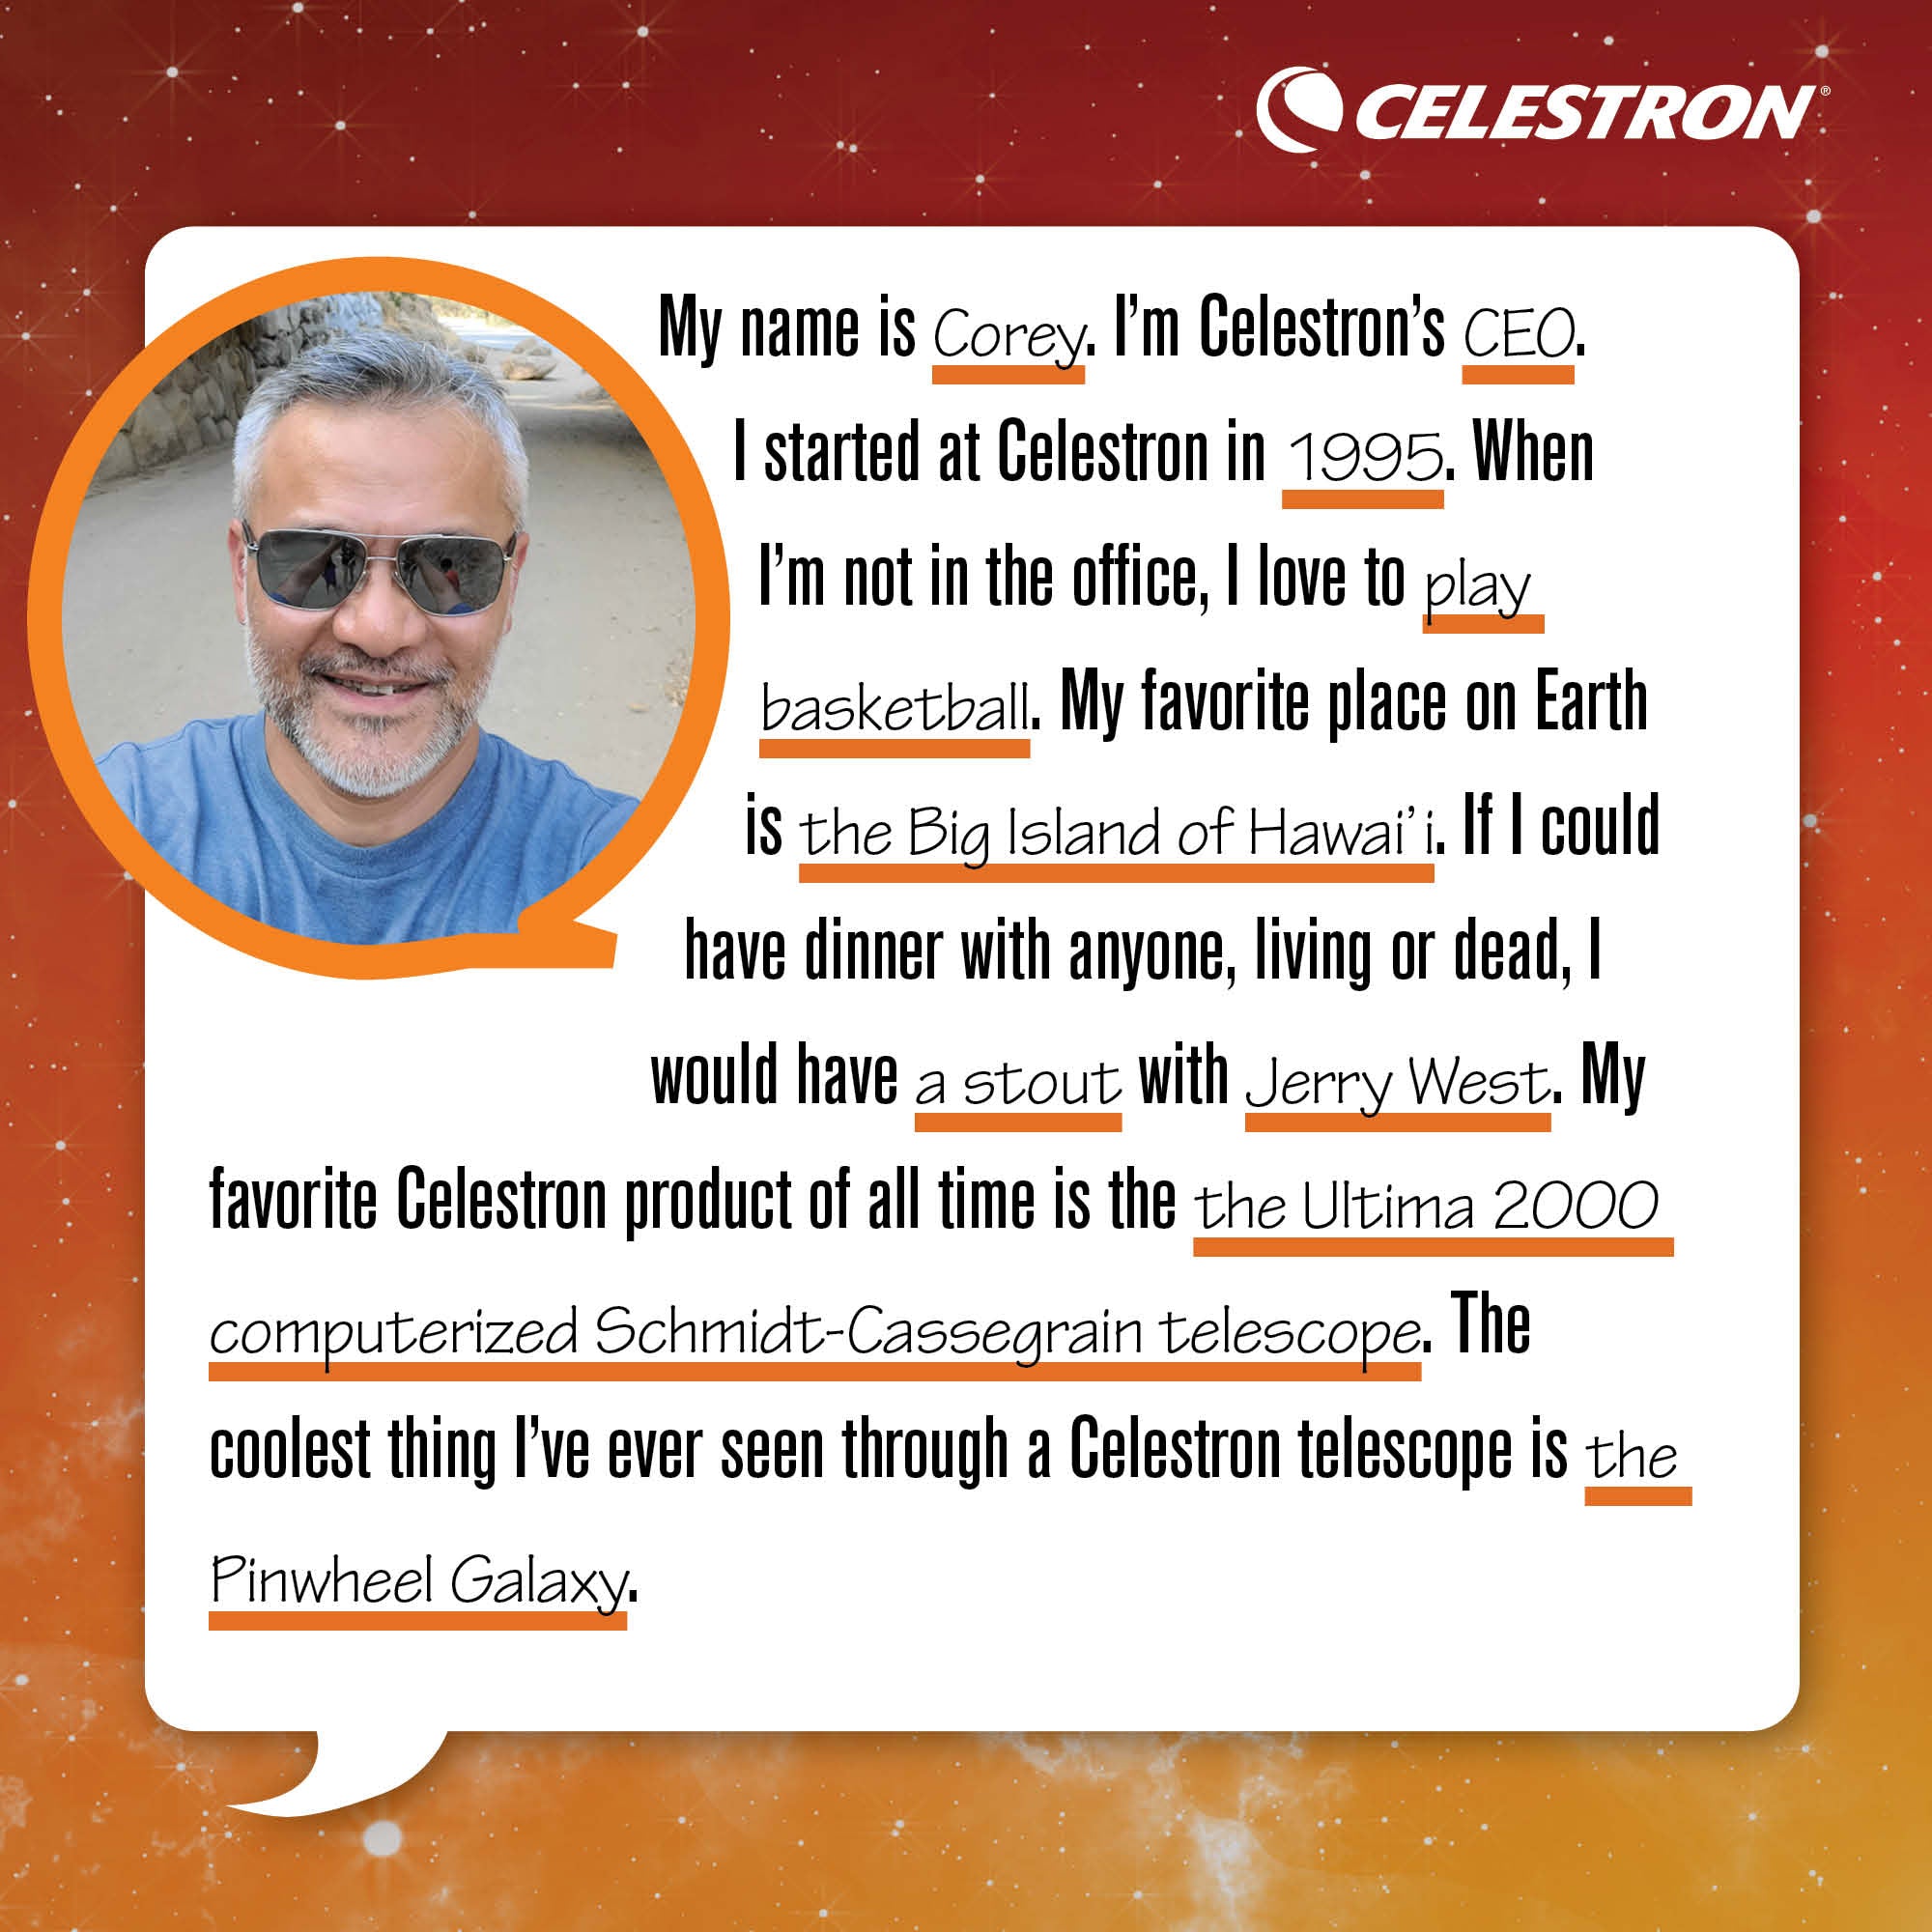 My name is Corey. I'm Celestron's CEO. I started at Celestron in 1995. When I'm not in the office, I love to play basketball.  My favorite place on Earth is The Big Island of Hawai'i. If I could have dinner with anyone, living or dead, I would have a stout with Jerry West. My favorite Celestron product of all time is the Ultima 2000 computerized Schmidt-Cassegrain telescope. The coolest thing I've ever seen through a Celestron telescope is the Pinwheel Galaxy.